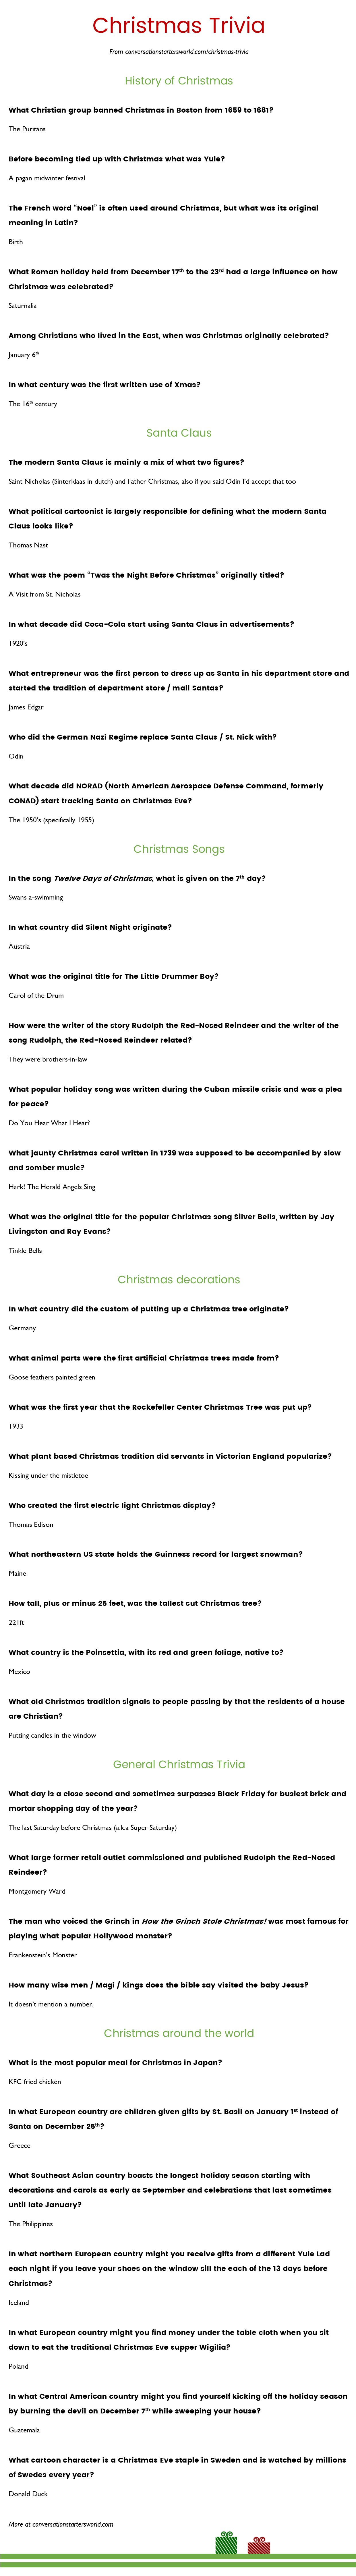 Bible Family Feud Questions and Answers Printable That are Breathtaking | Bowman's Website